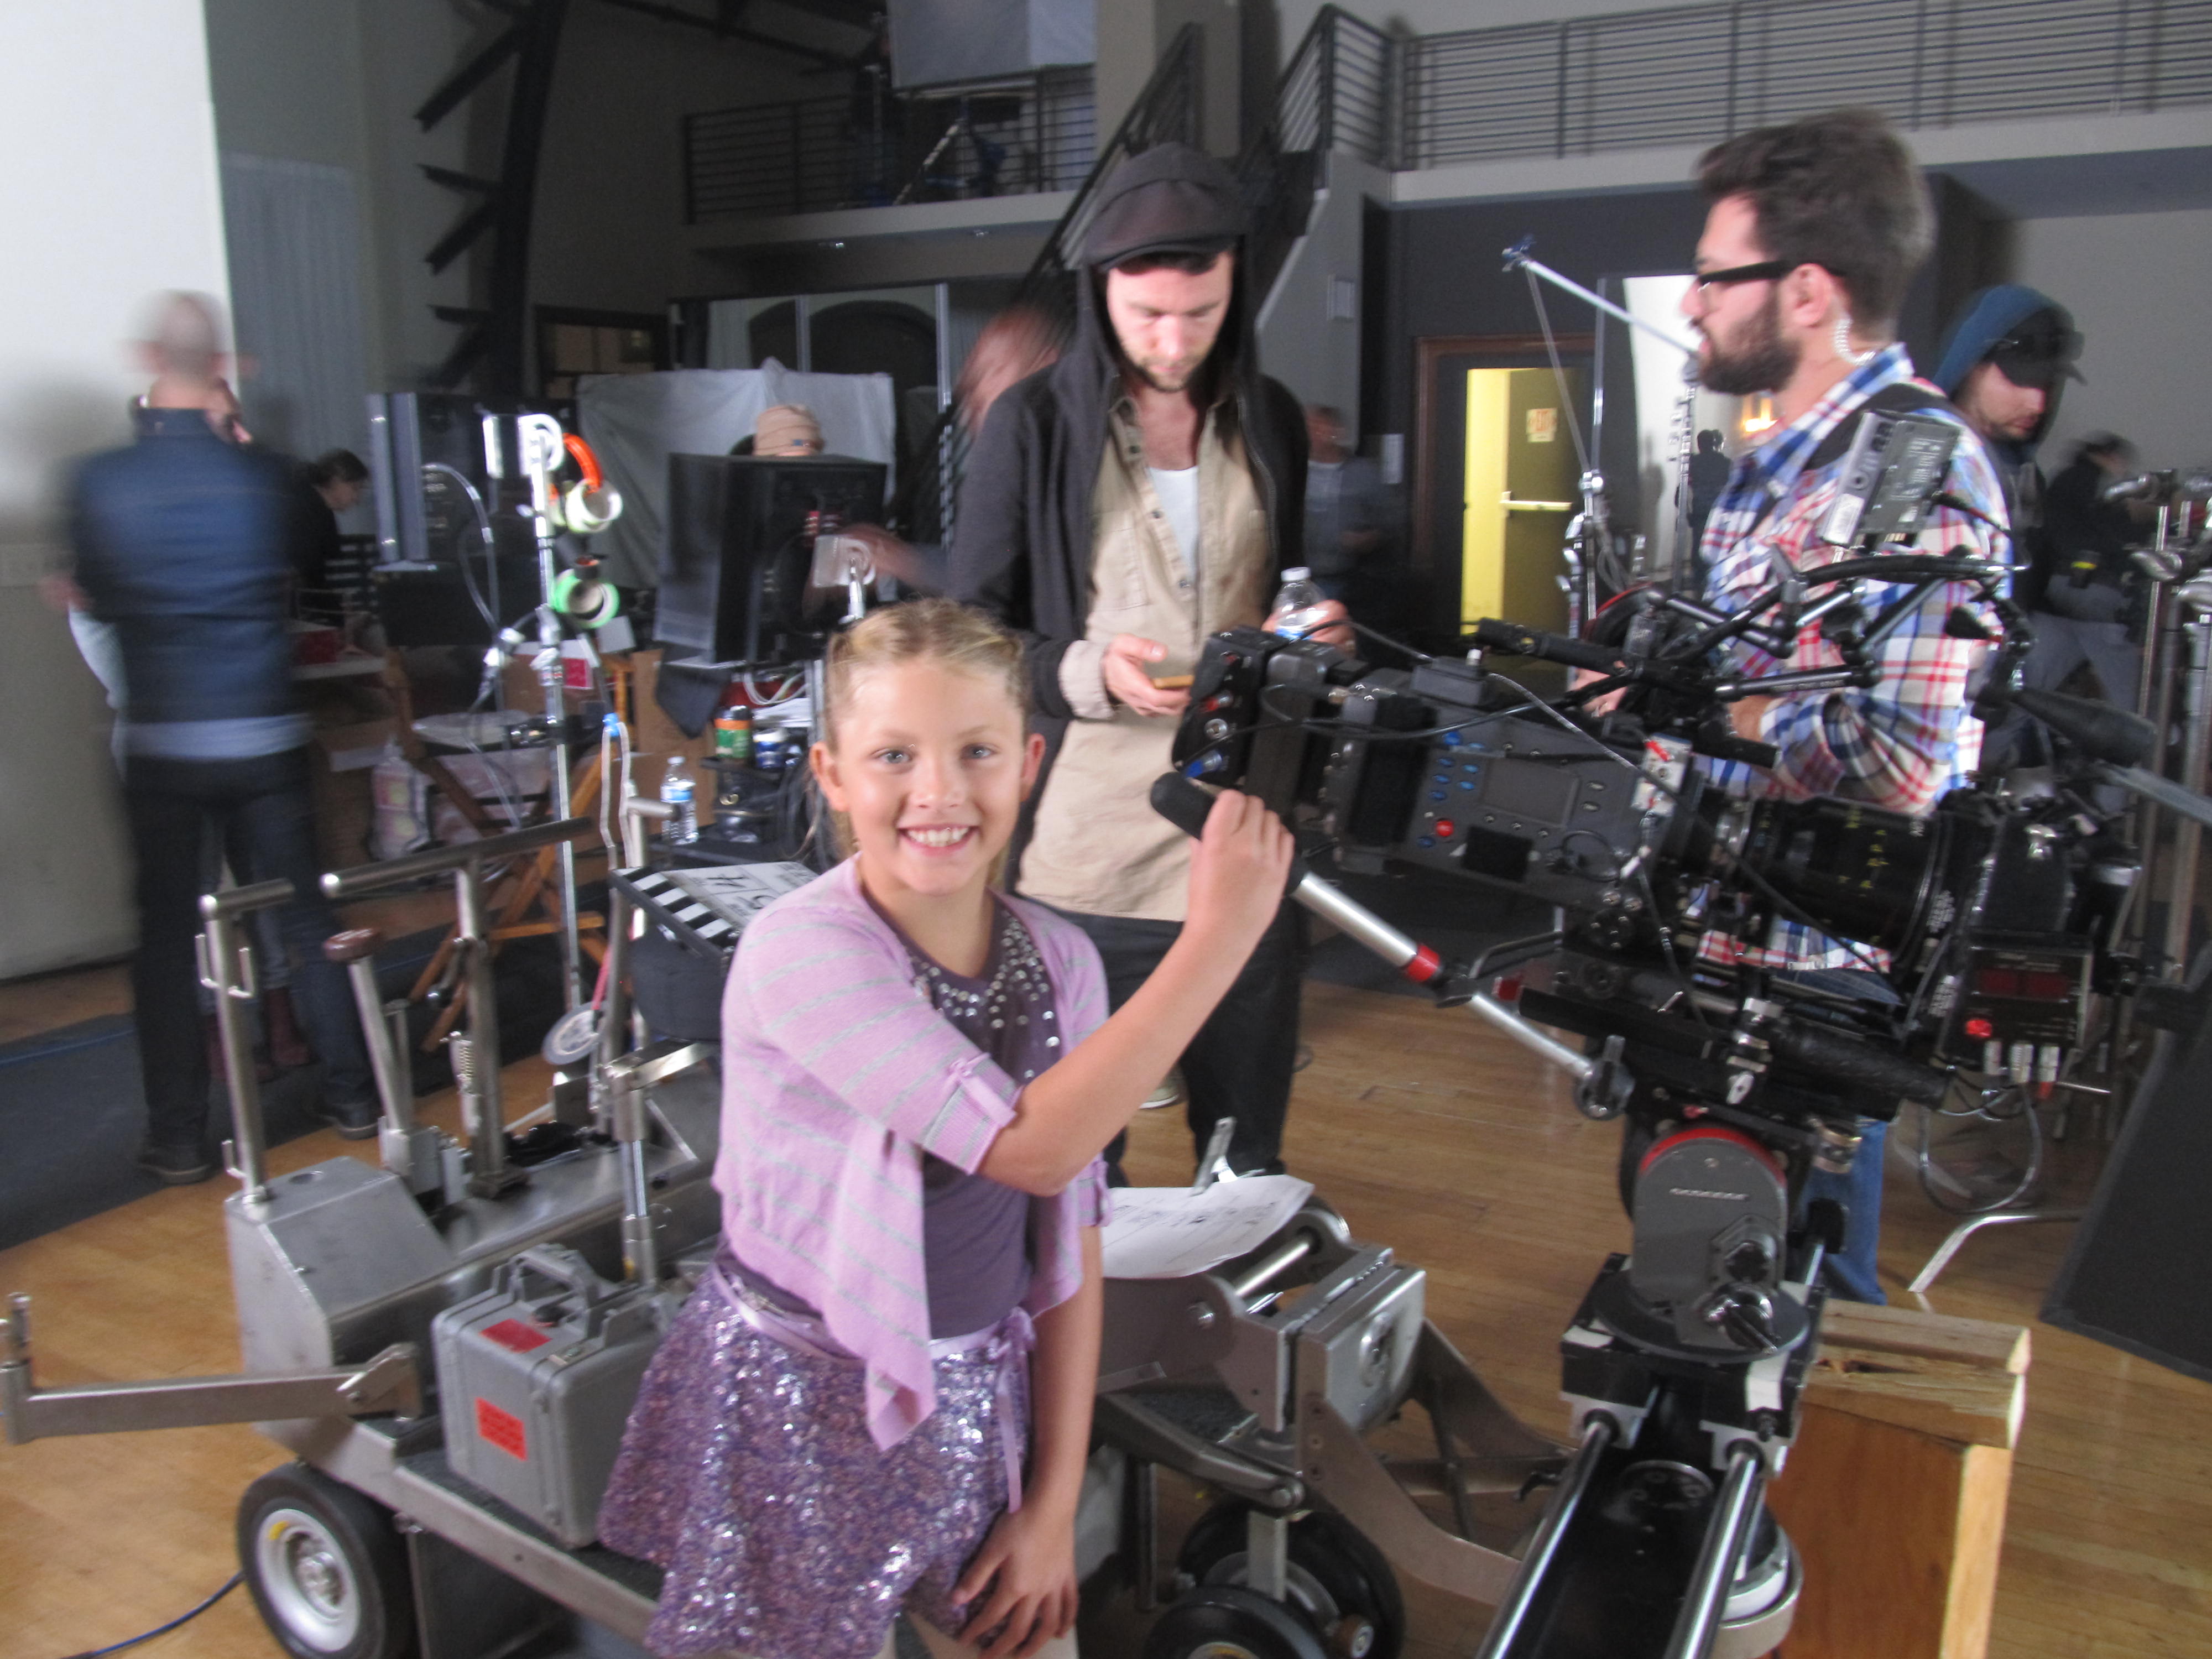 Ryan on set checking out the camera after wrapping AMERICAN GIRL - Isabelle, Girl of the Year 2014 doll commercial (Dec. 2013)